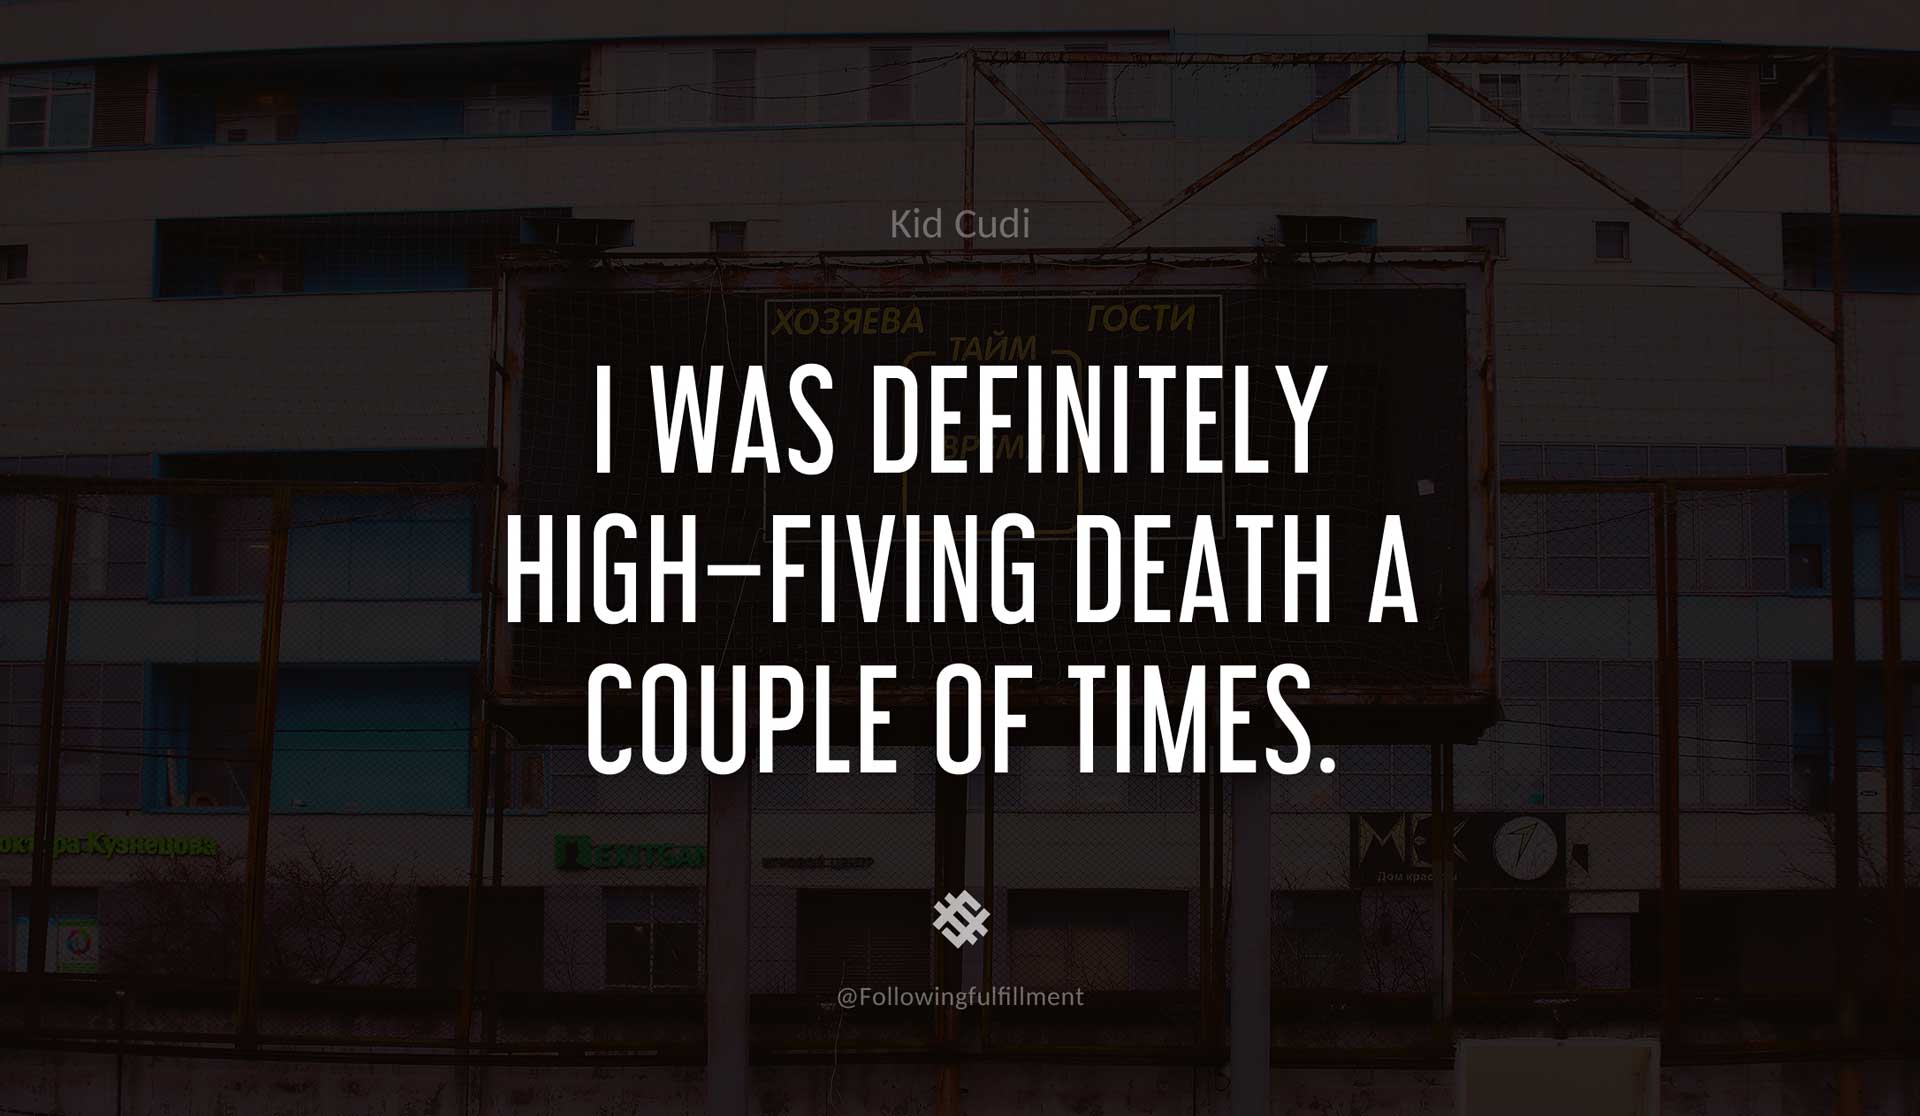 I-was-definitely-high-fiving-death-a-couple-of-times.--KID-CUDI-Quote.jpg